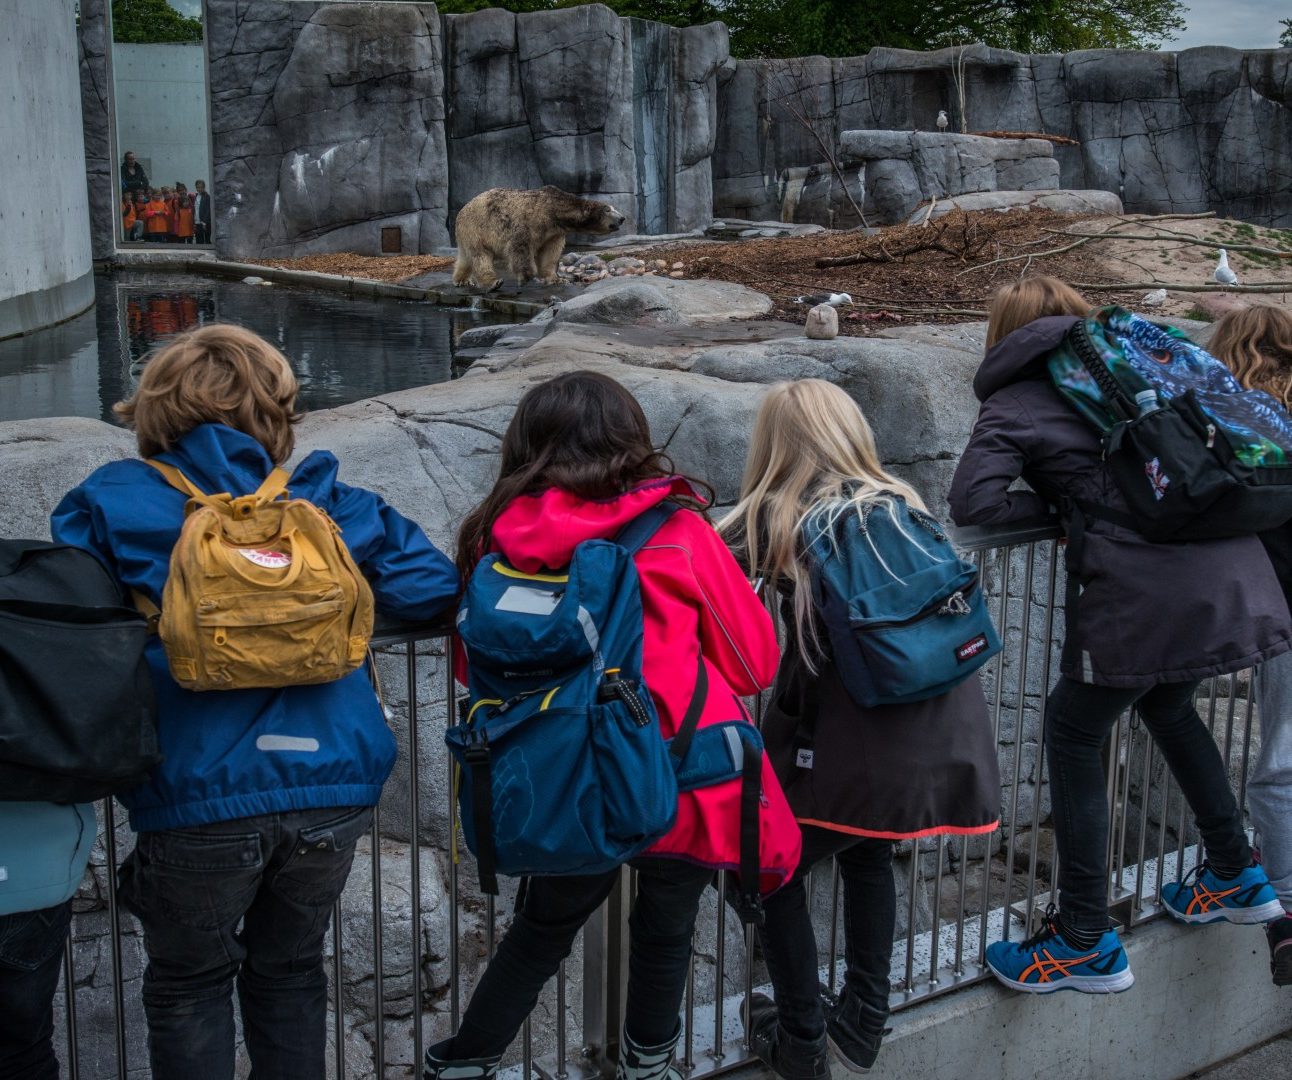 A group of school children standing next to a zoo enclosure, looking at a captive brown bear